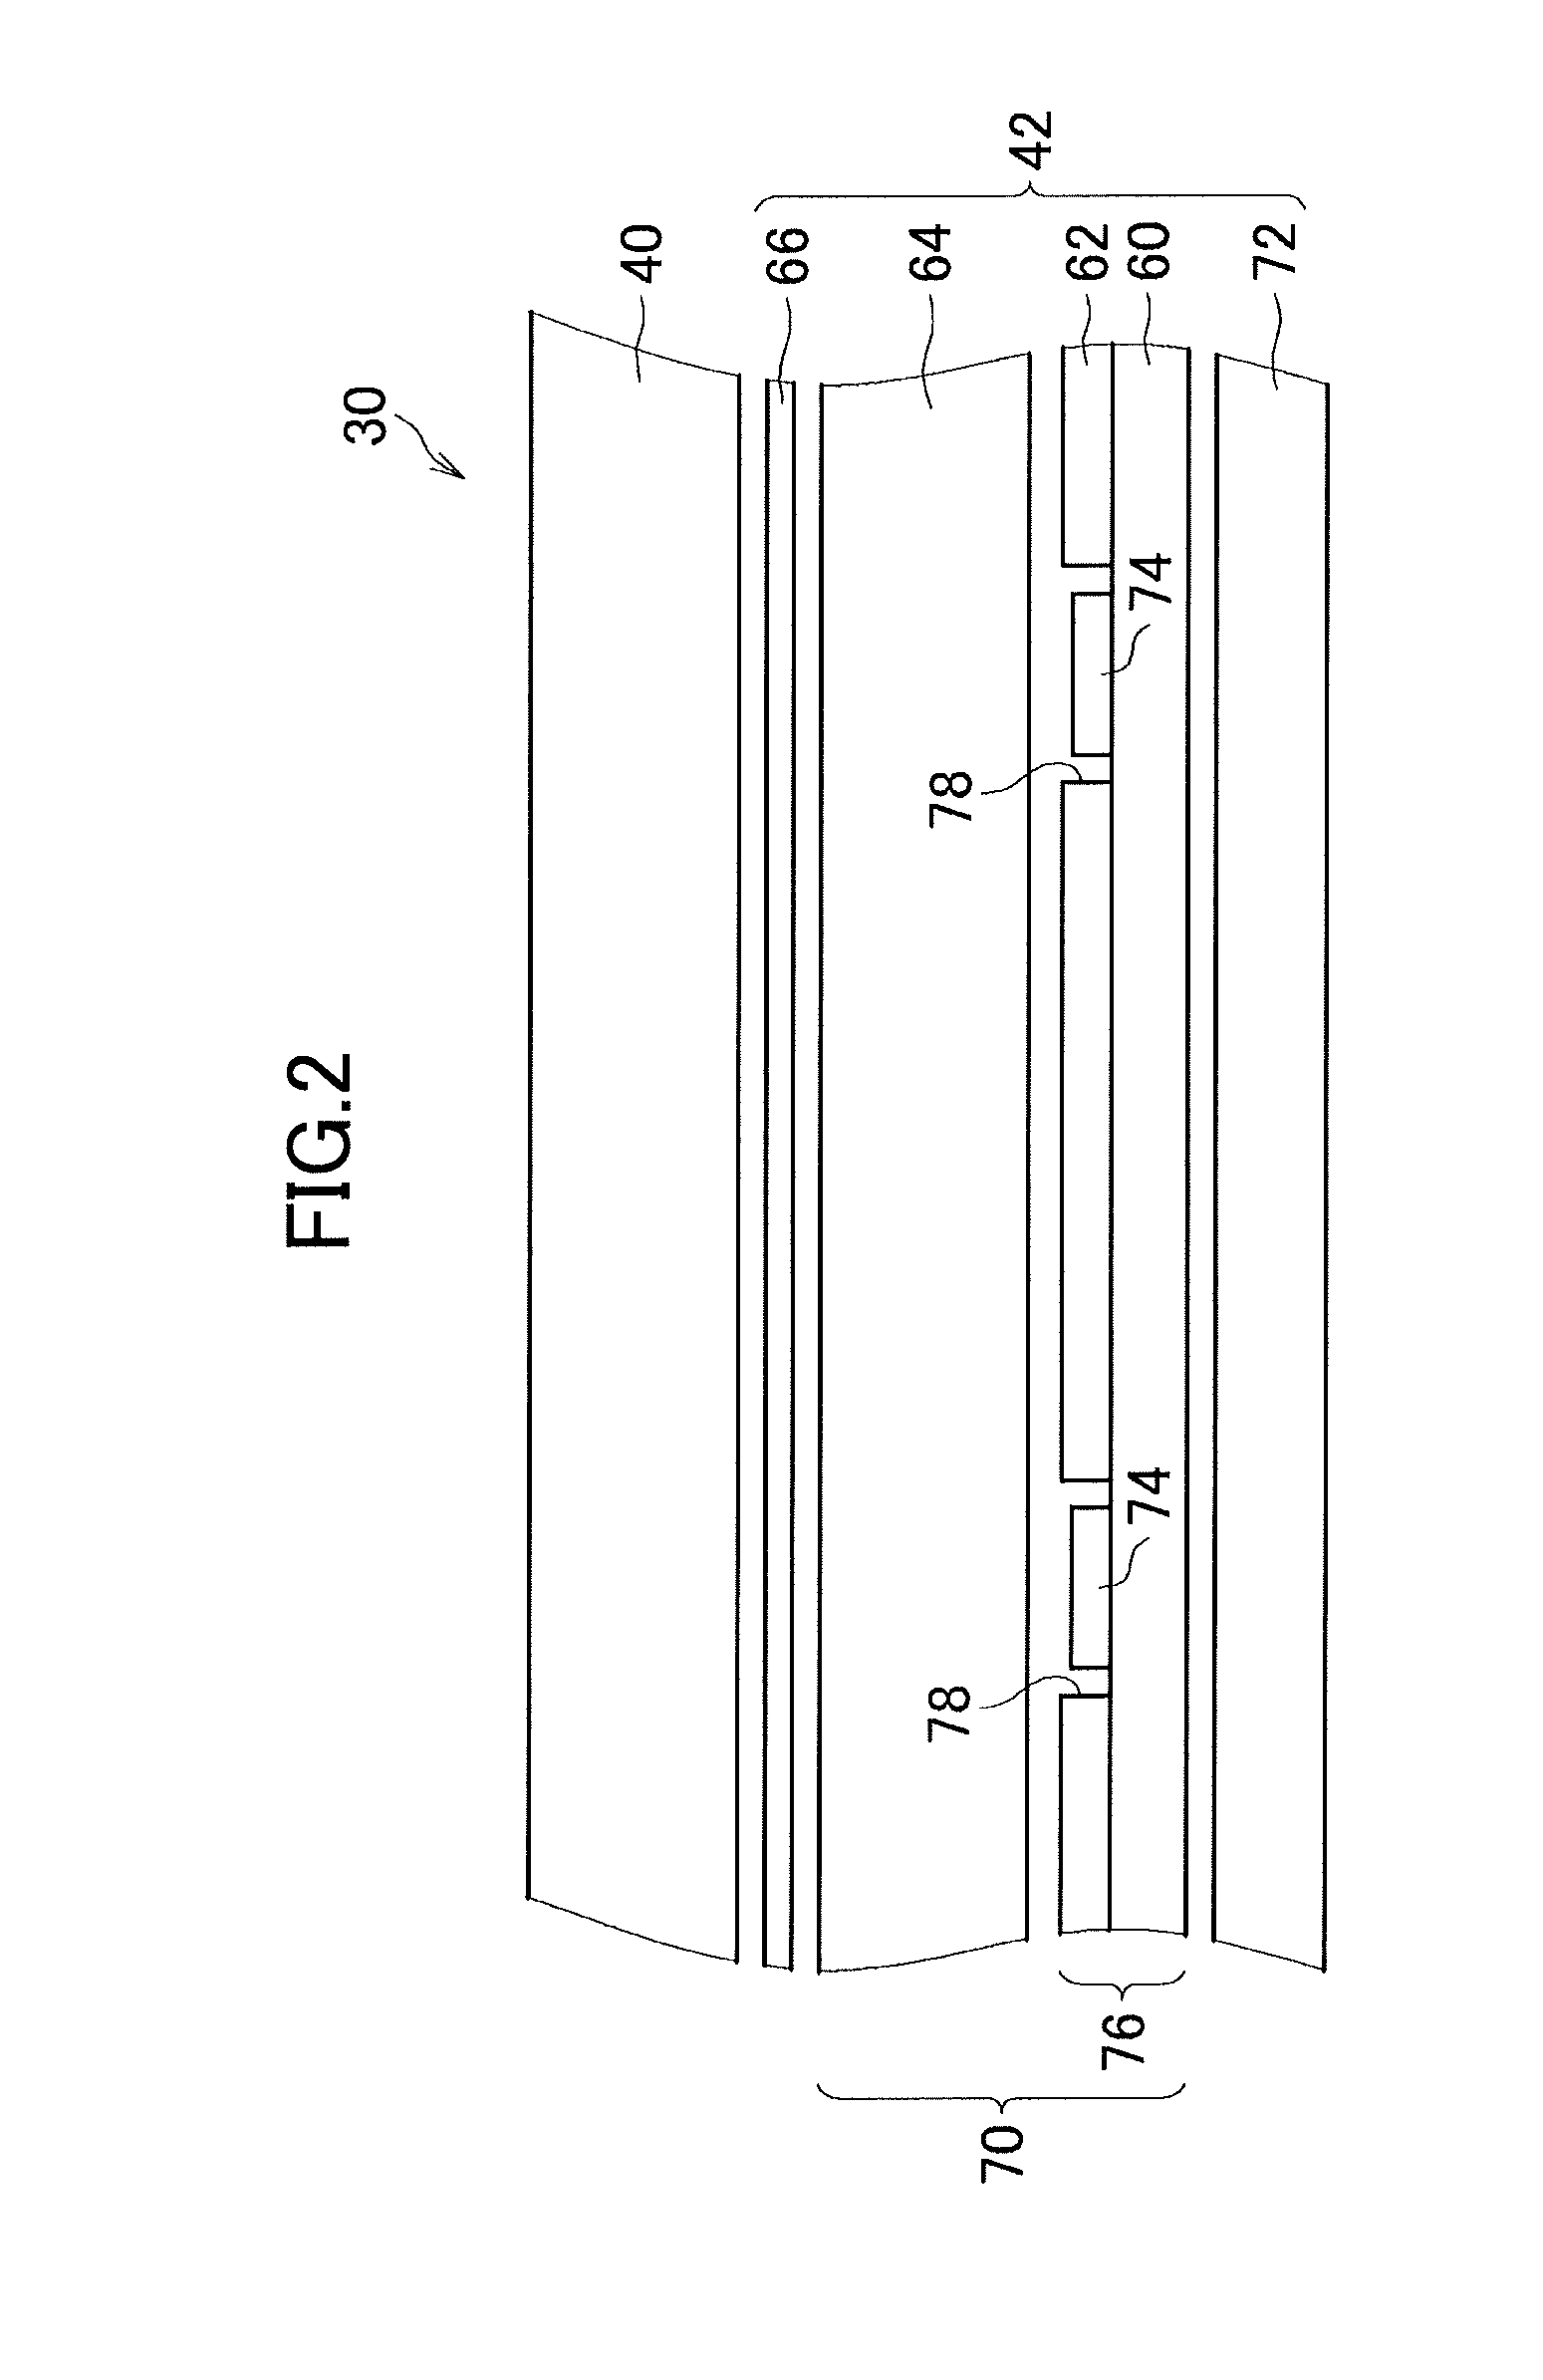 Planar light source device, liquid crystal display device, and television set